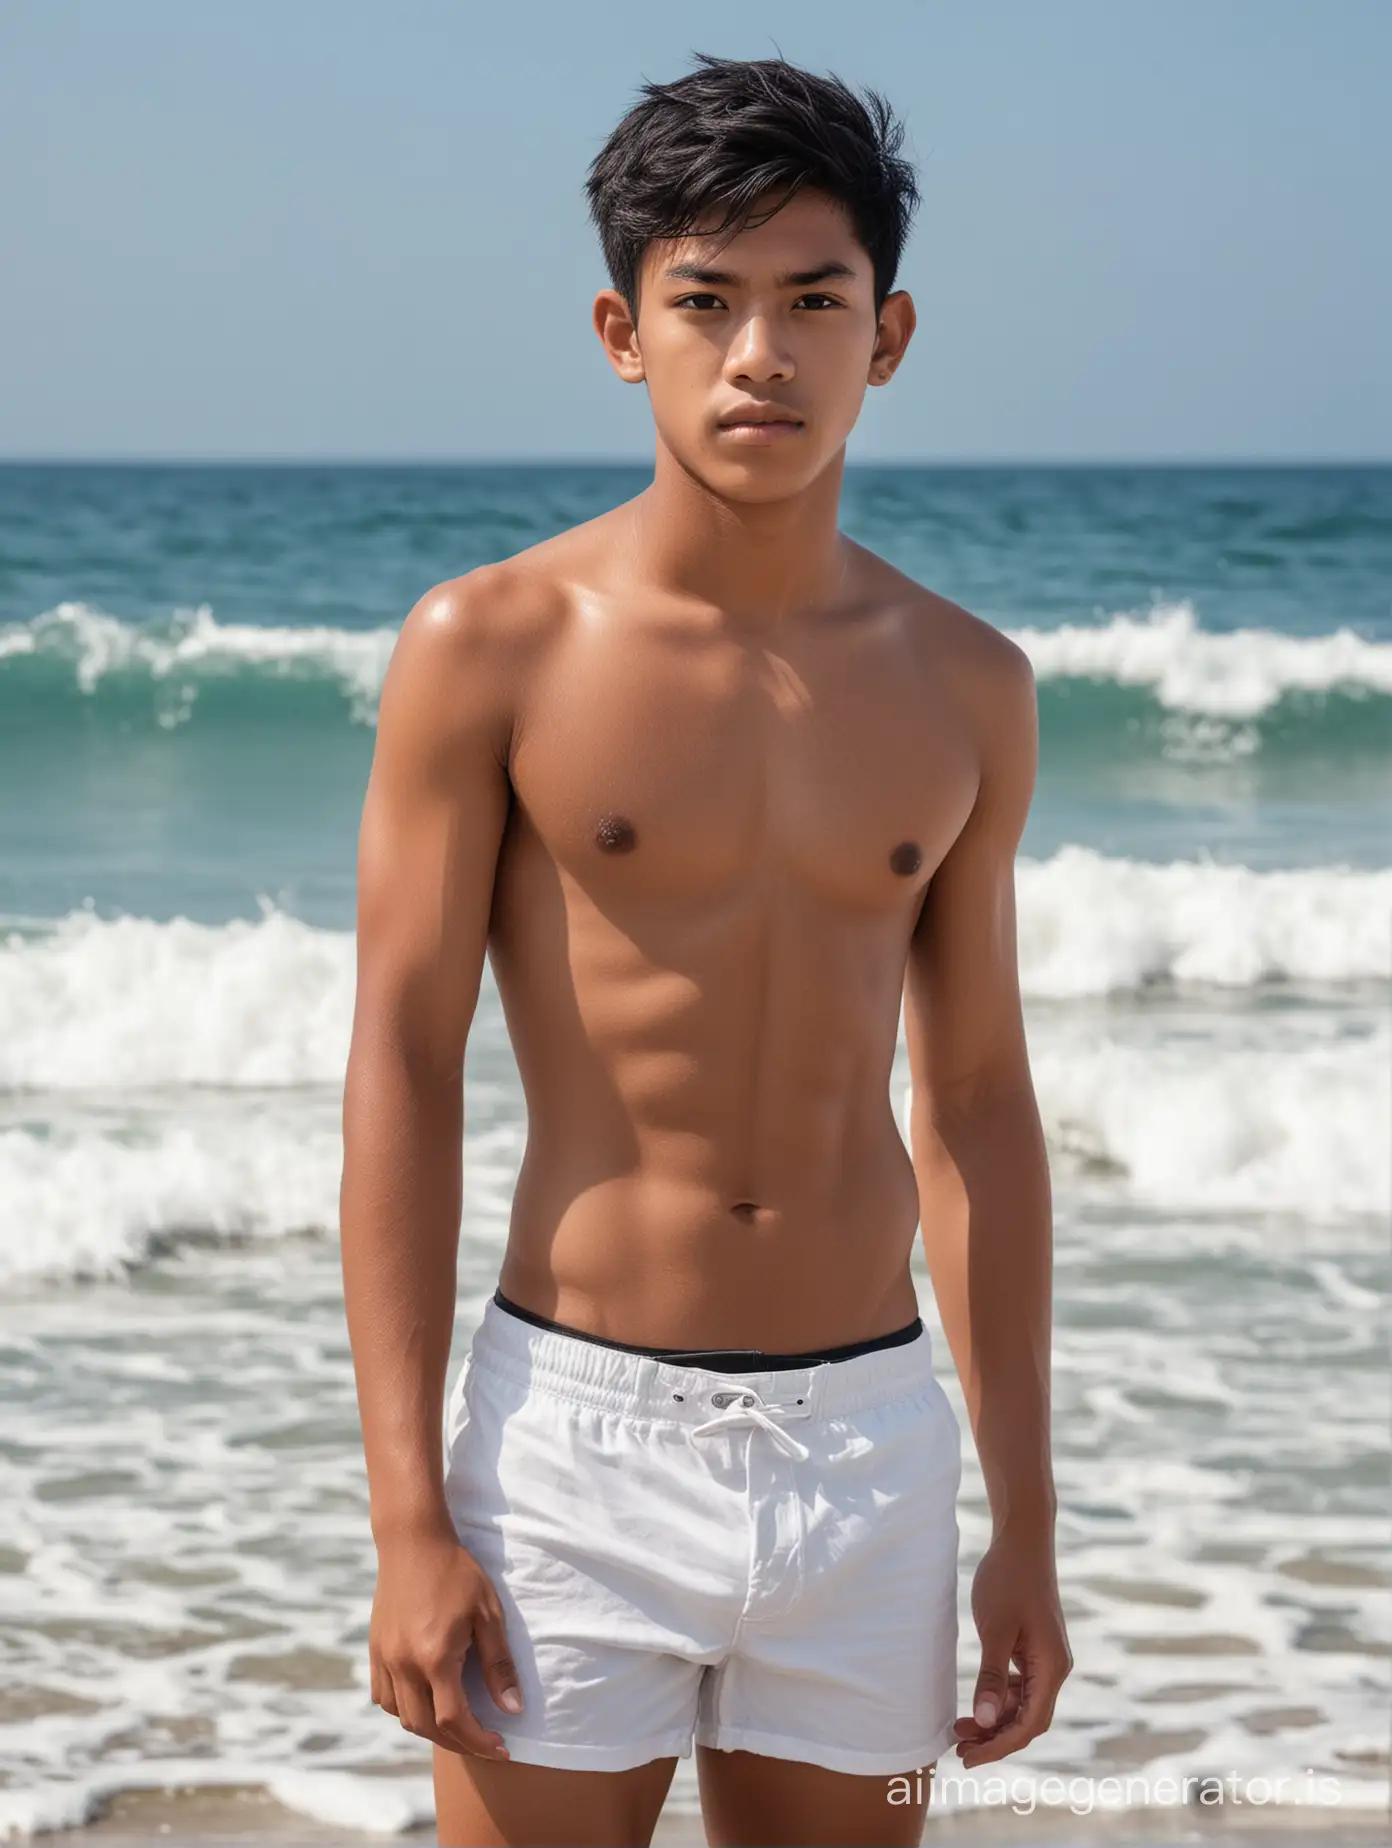 YOUNG Indonesian boy aged 17 years old, black short neat hair, posing at the beach for photo. Wearing mini brief white colour,  serious face, six pack body, background is the blue sea, with blue waves.